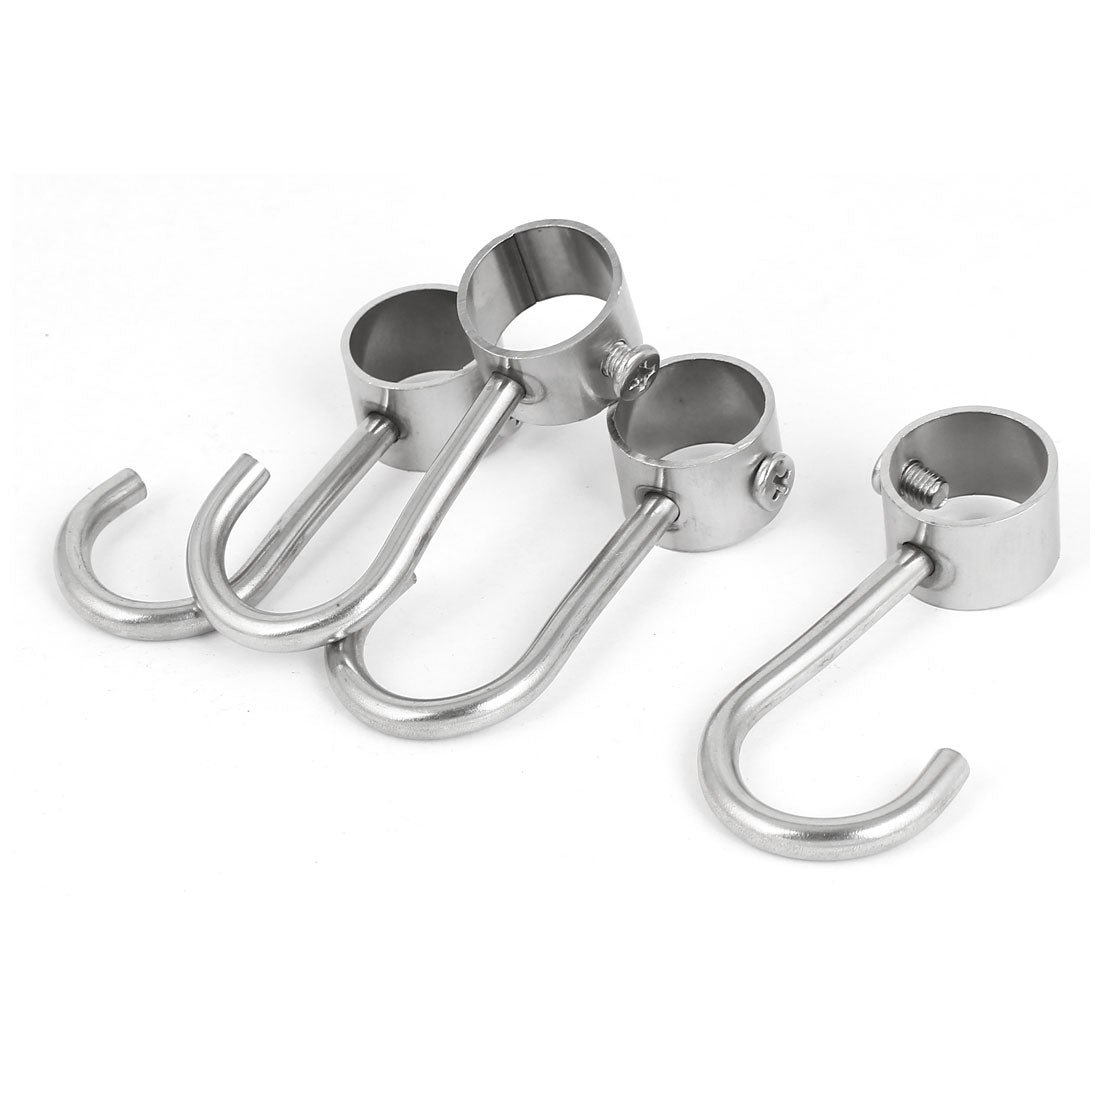 uxcell Uxcell Wardrobe Bathroom Stainless Steel Hanging Tube Hook Hanger 22mm Dia 4pcs